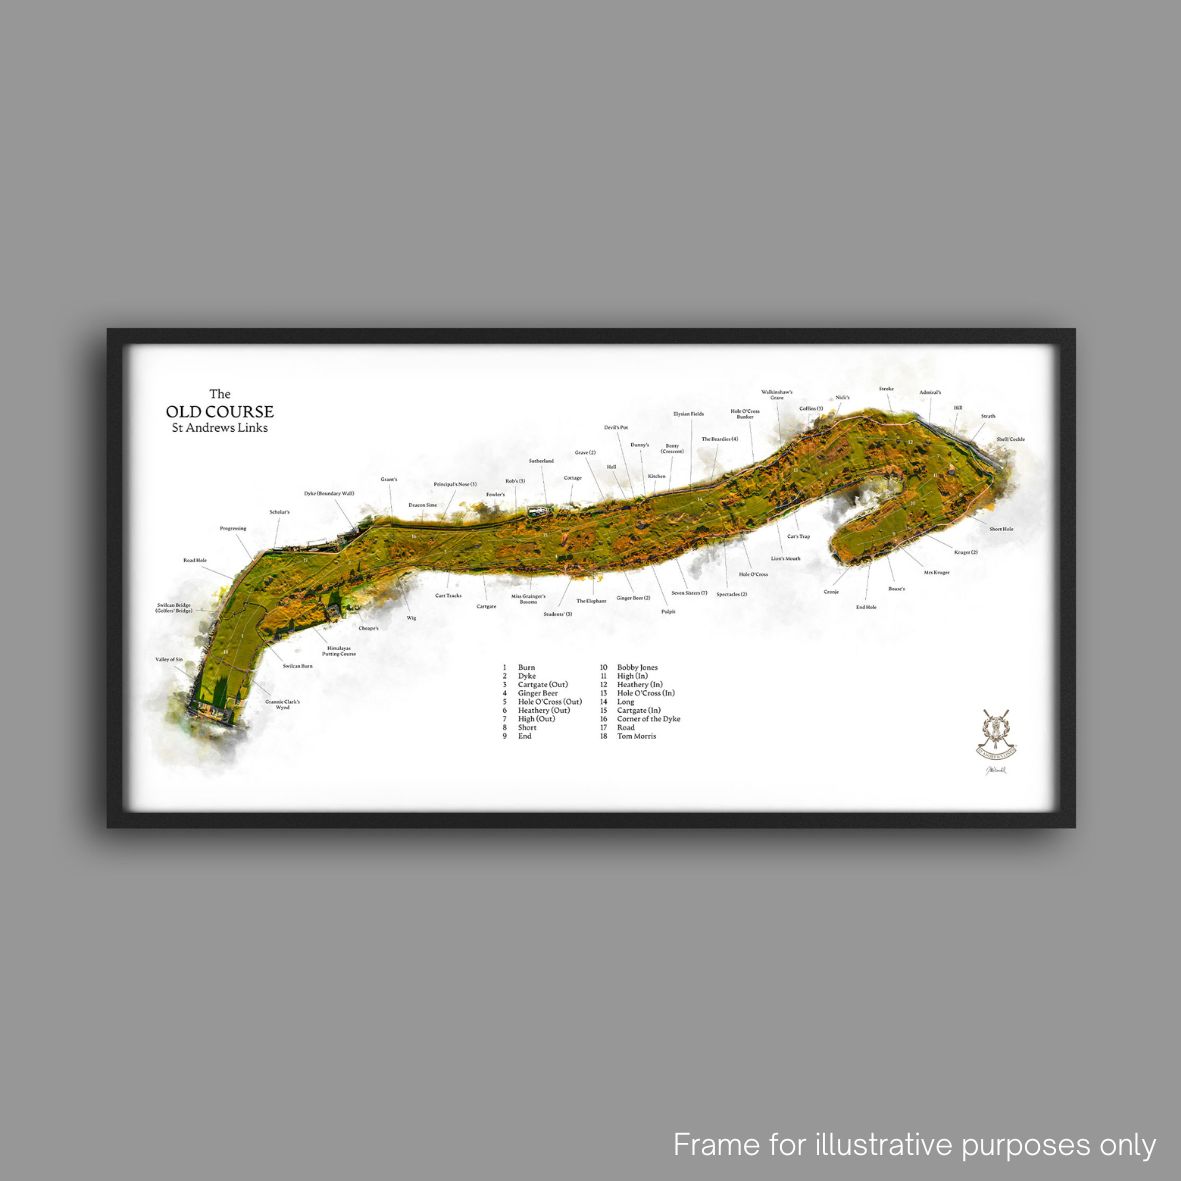 FRAMED PRINT NAMED FEATURES OF OLD COURSE